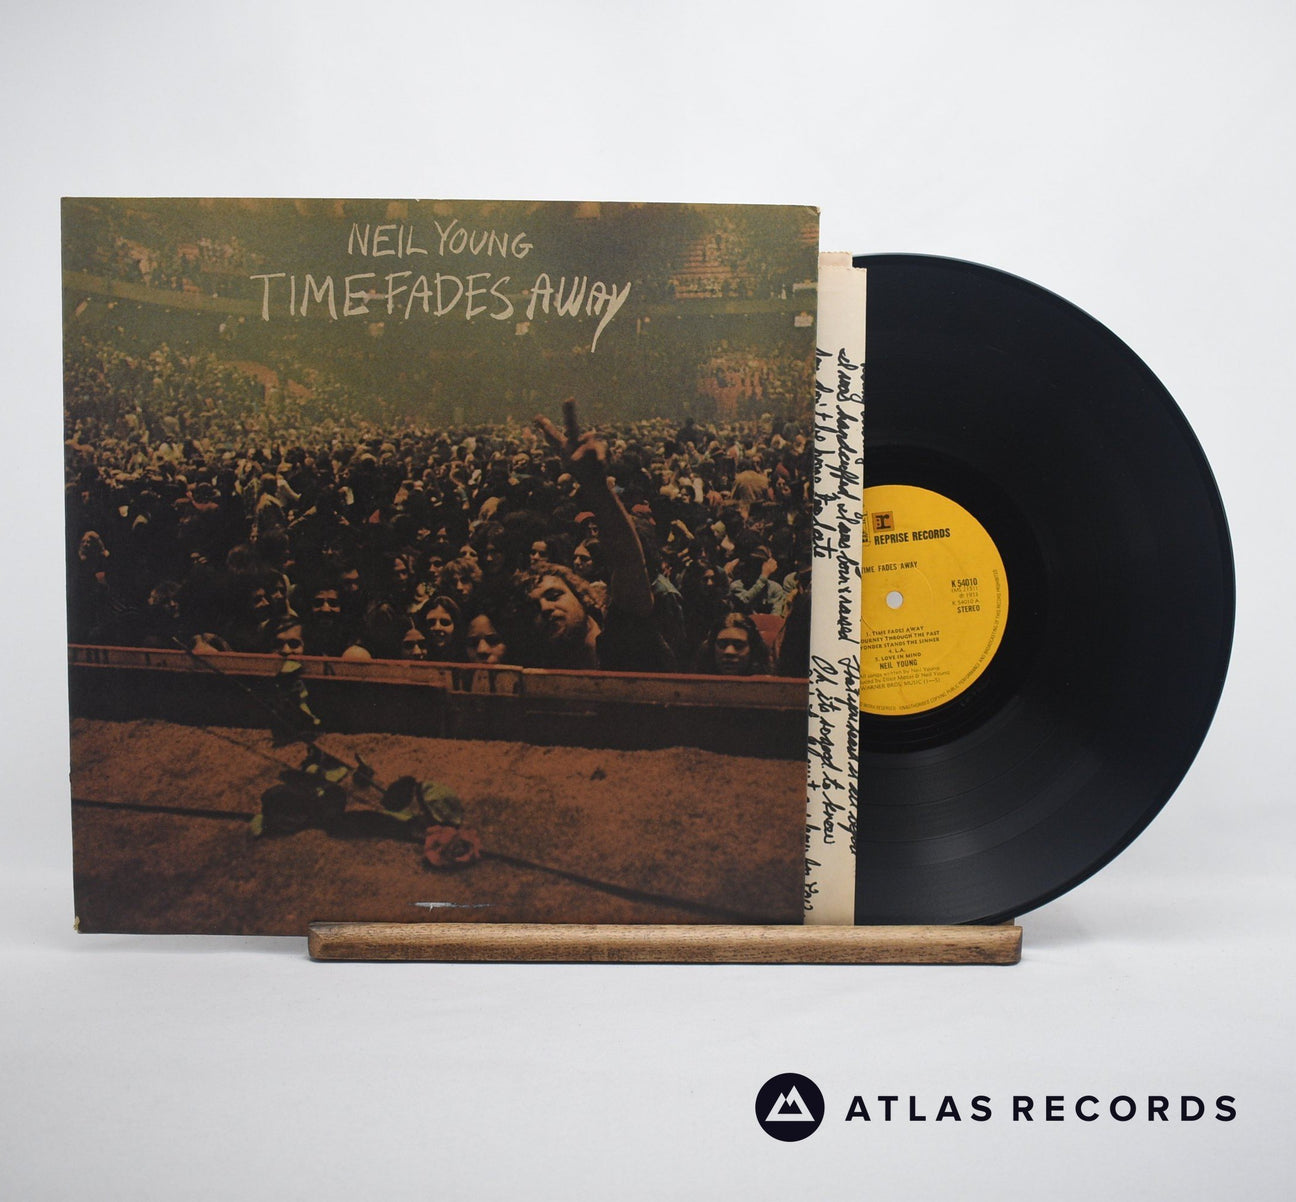 Neil Young Time Fades Away LP Vinyl Record - Front Cover & Record